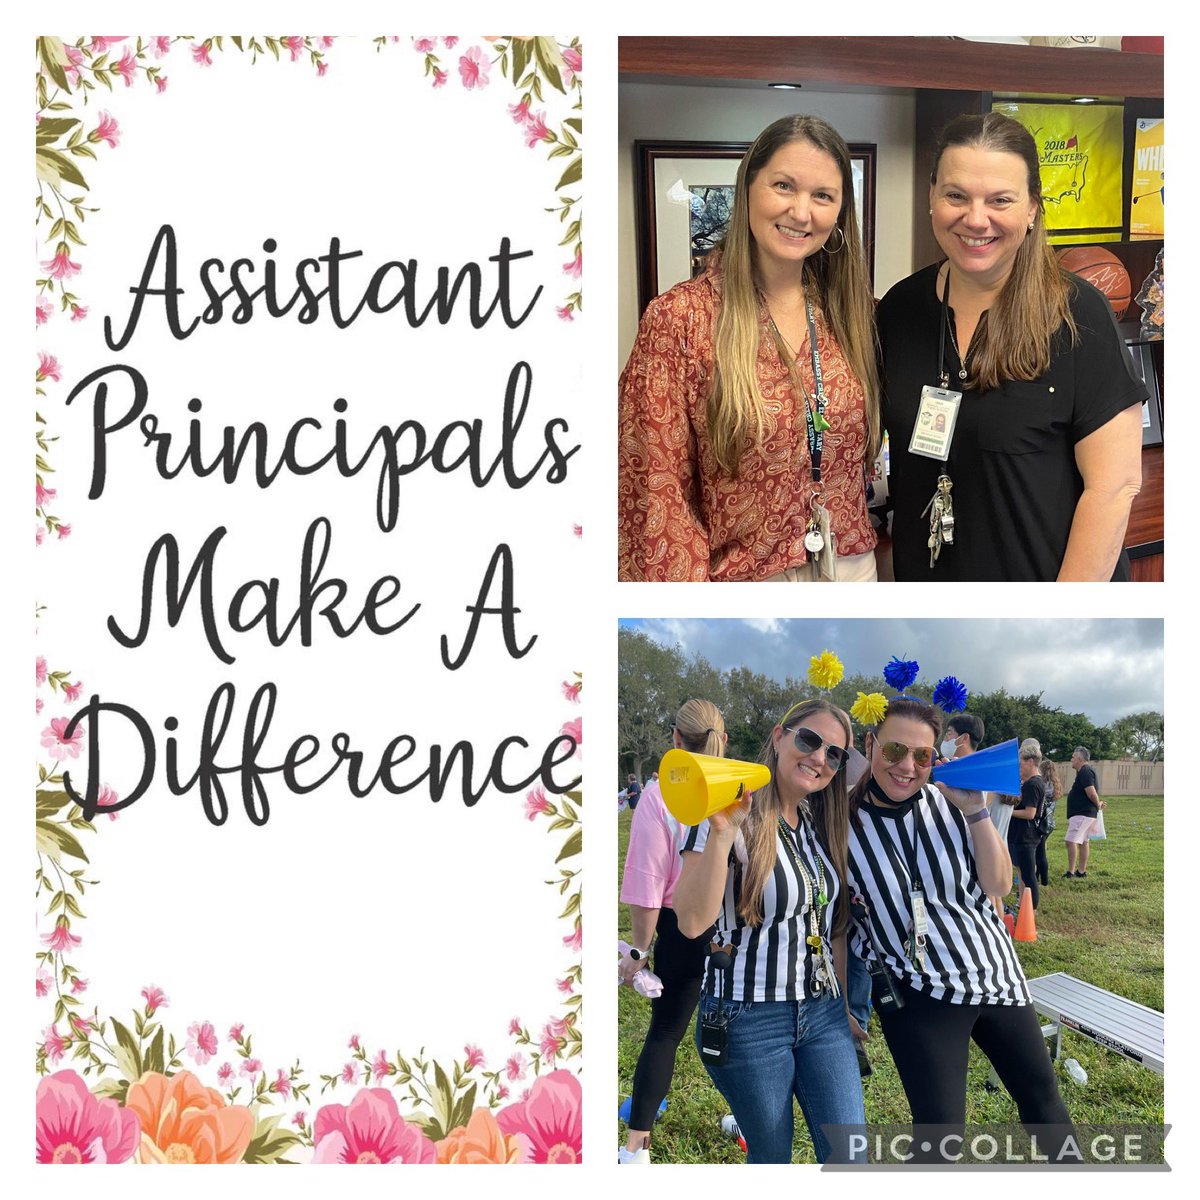 Happy National Assistant Principal Week to these lovely ladies! We are so lucky to have you making a difference in our school! @jlhoover23 @HPE_MD @browardschools #APWeek #NationalAssistantPrincipalsWeek #BCPSProud